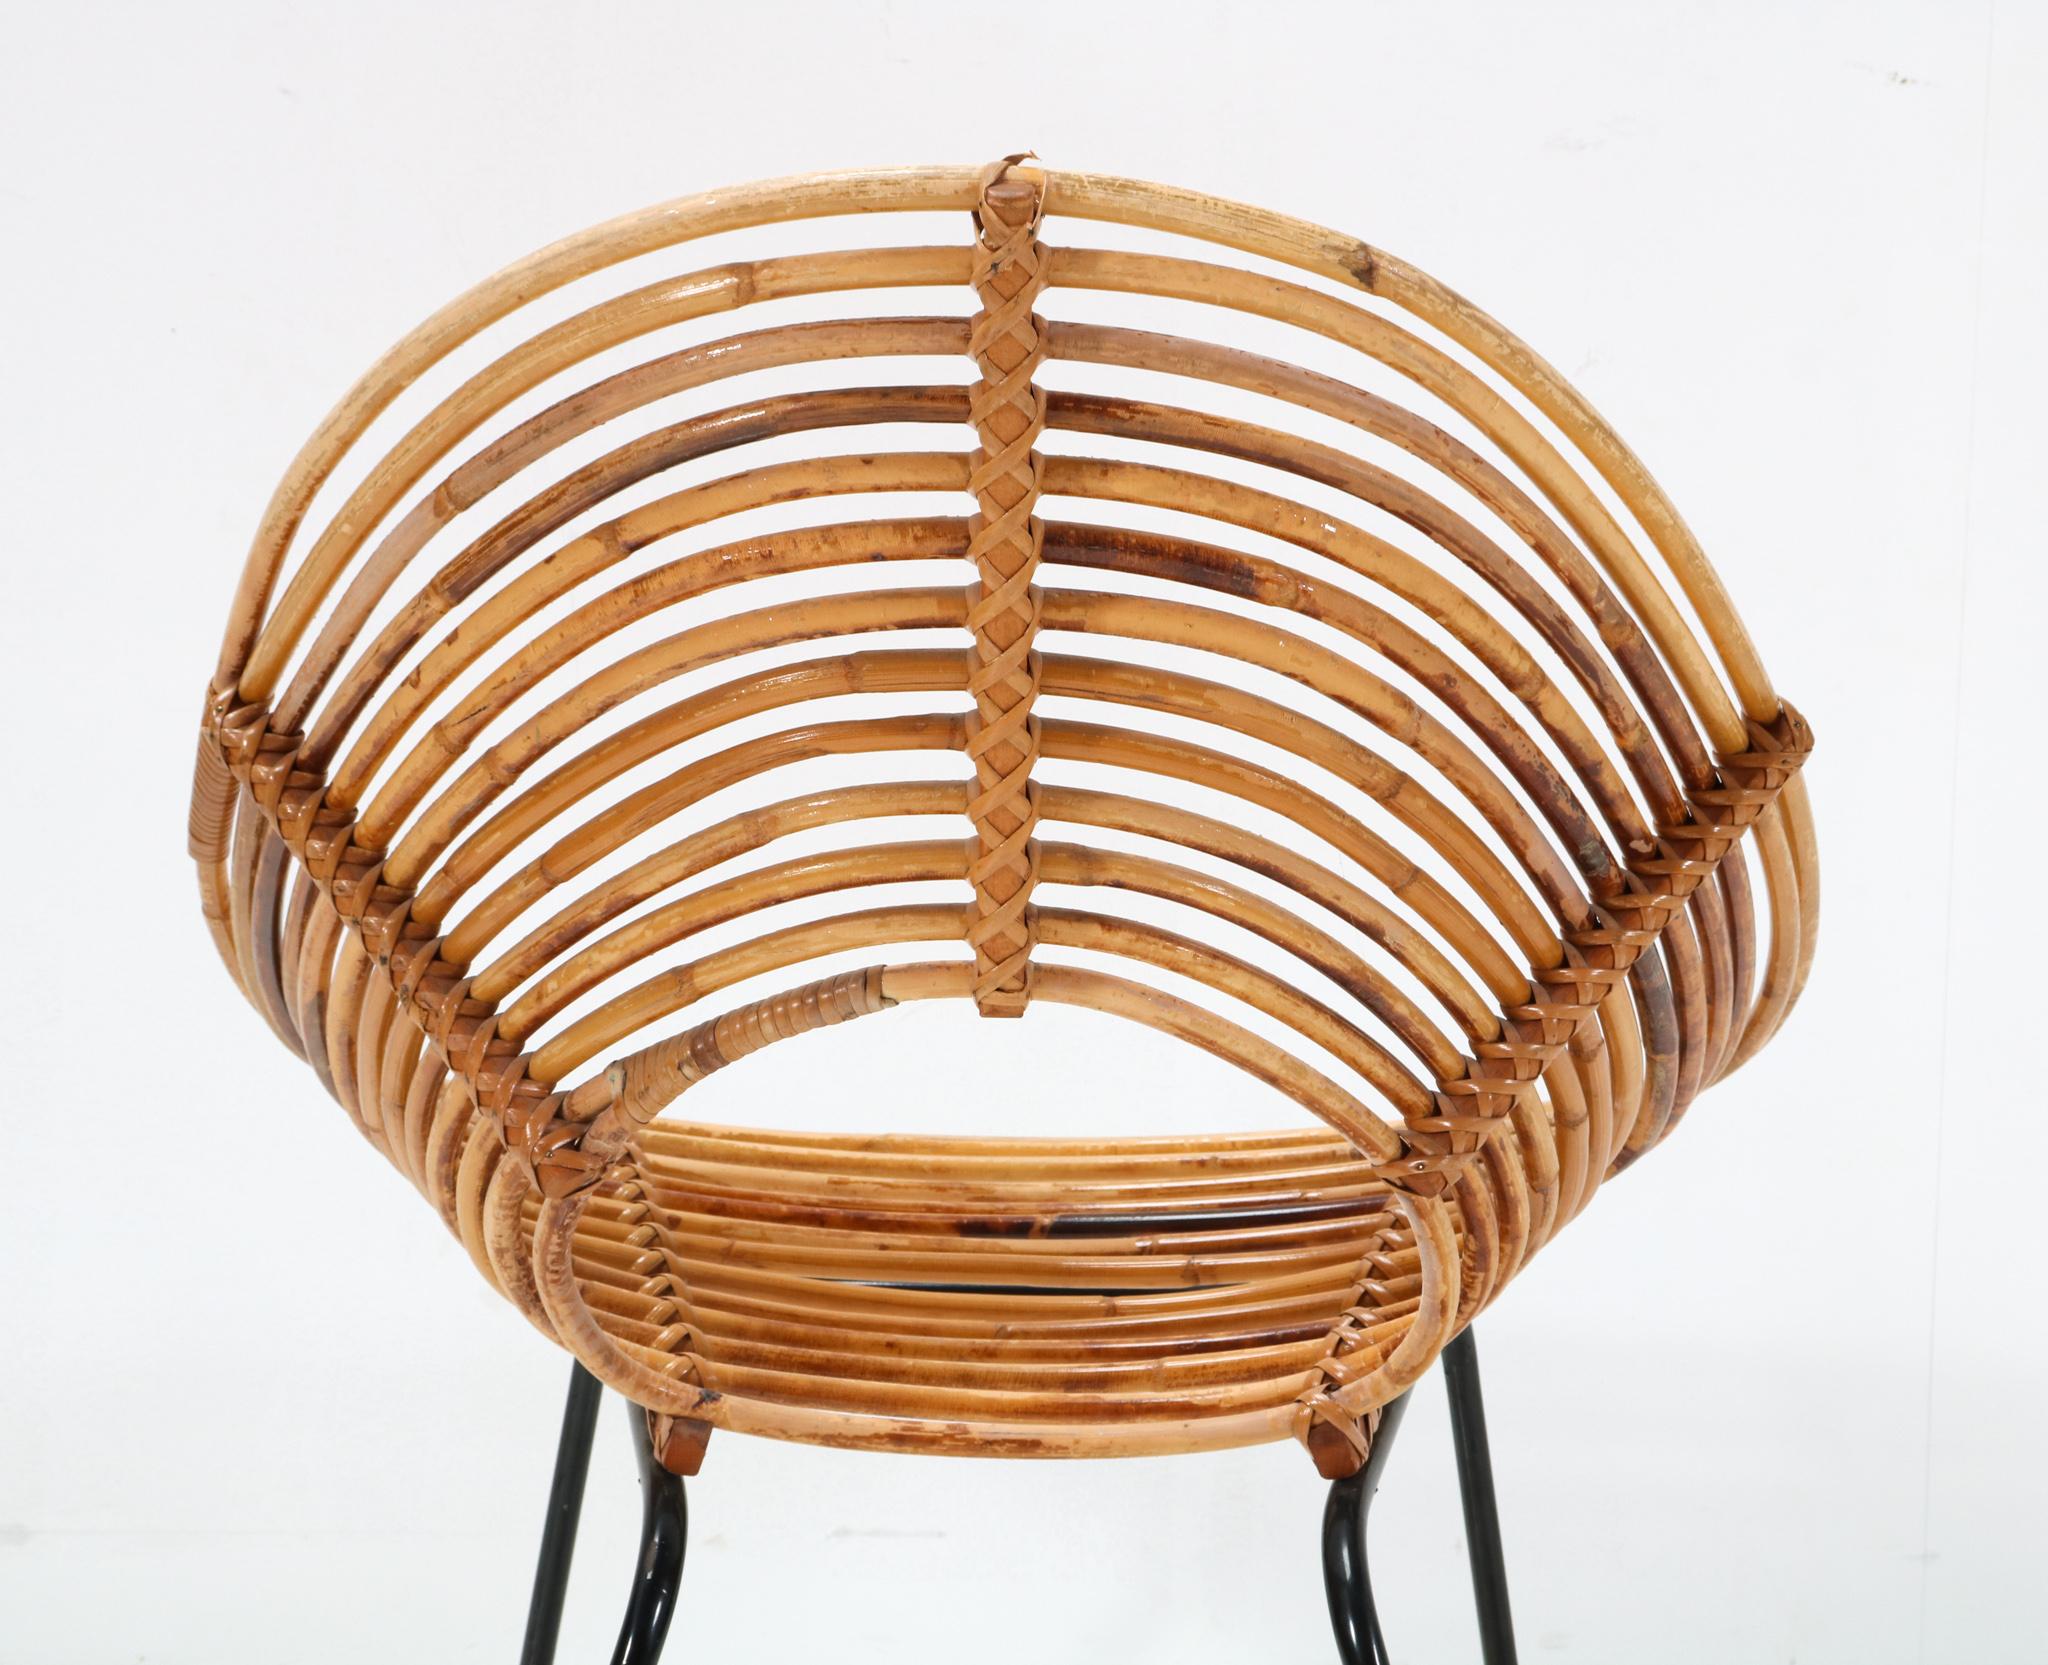 Rattan Mid-Century Modern Lounge Chair by Dirk van Sliedregt for Rohe, 1950s For Sale 1